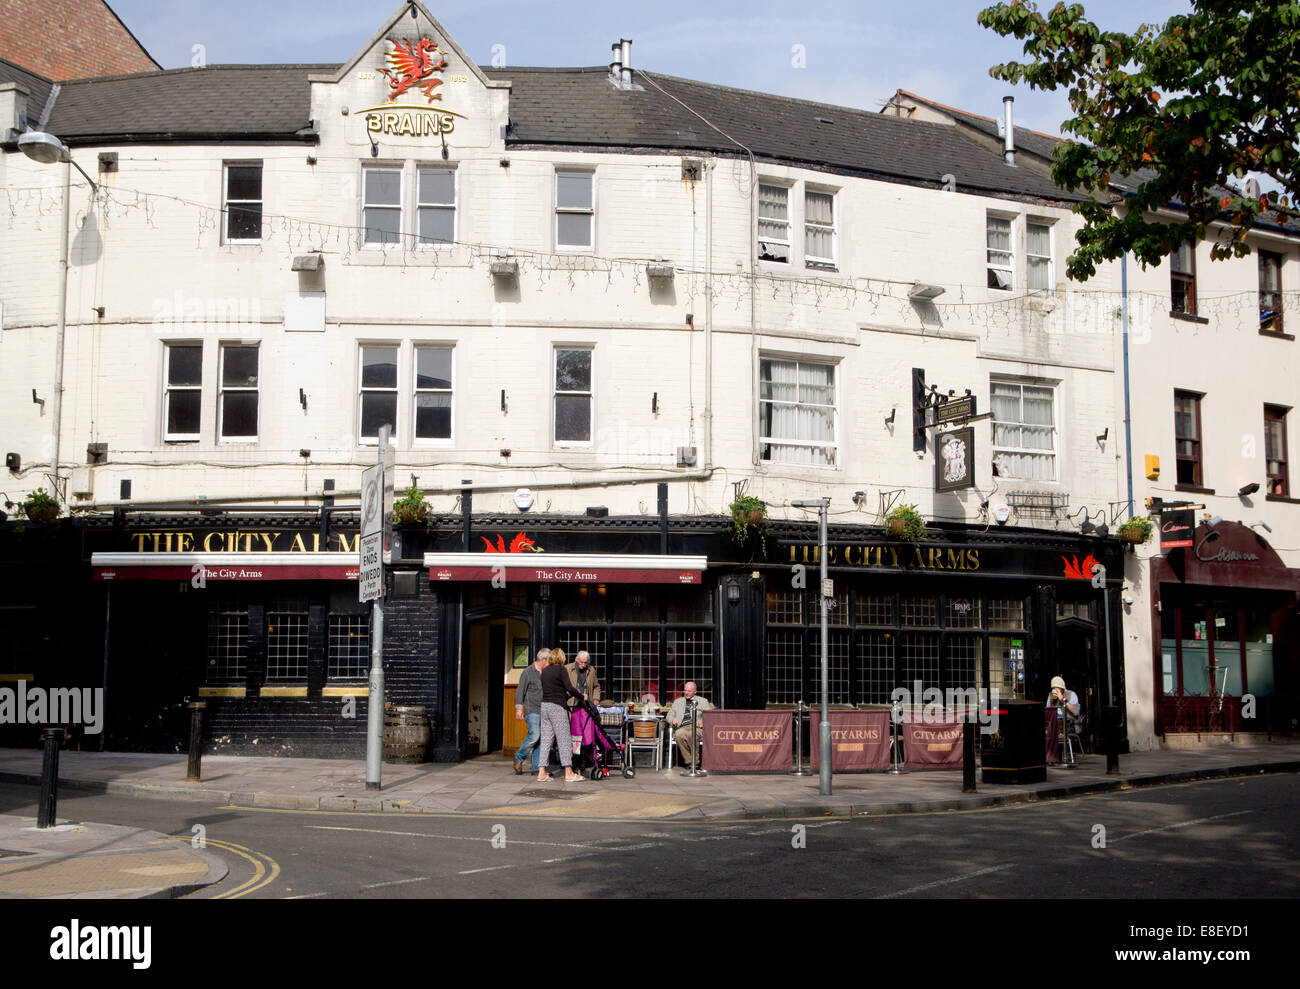 The City Arms public house, Cardiff, Wales. Stock Photo